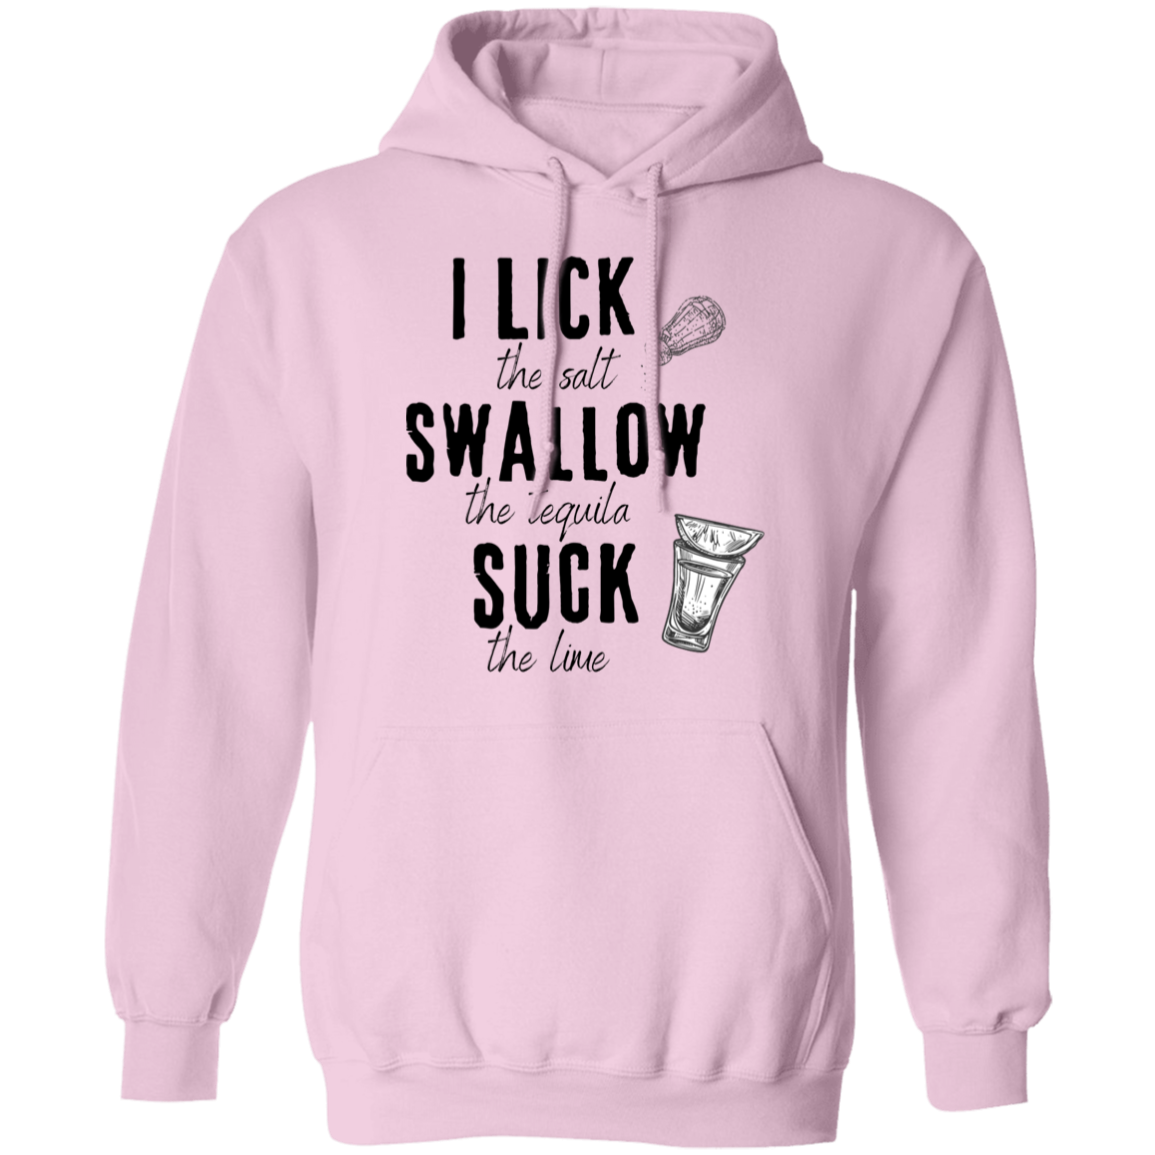 Lick the Lime, Birthday Gift, Fun Humor Pullover Hoodie, Funny Hoodie